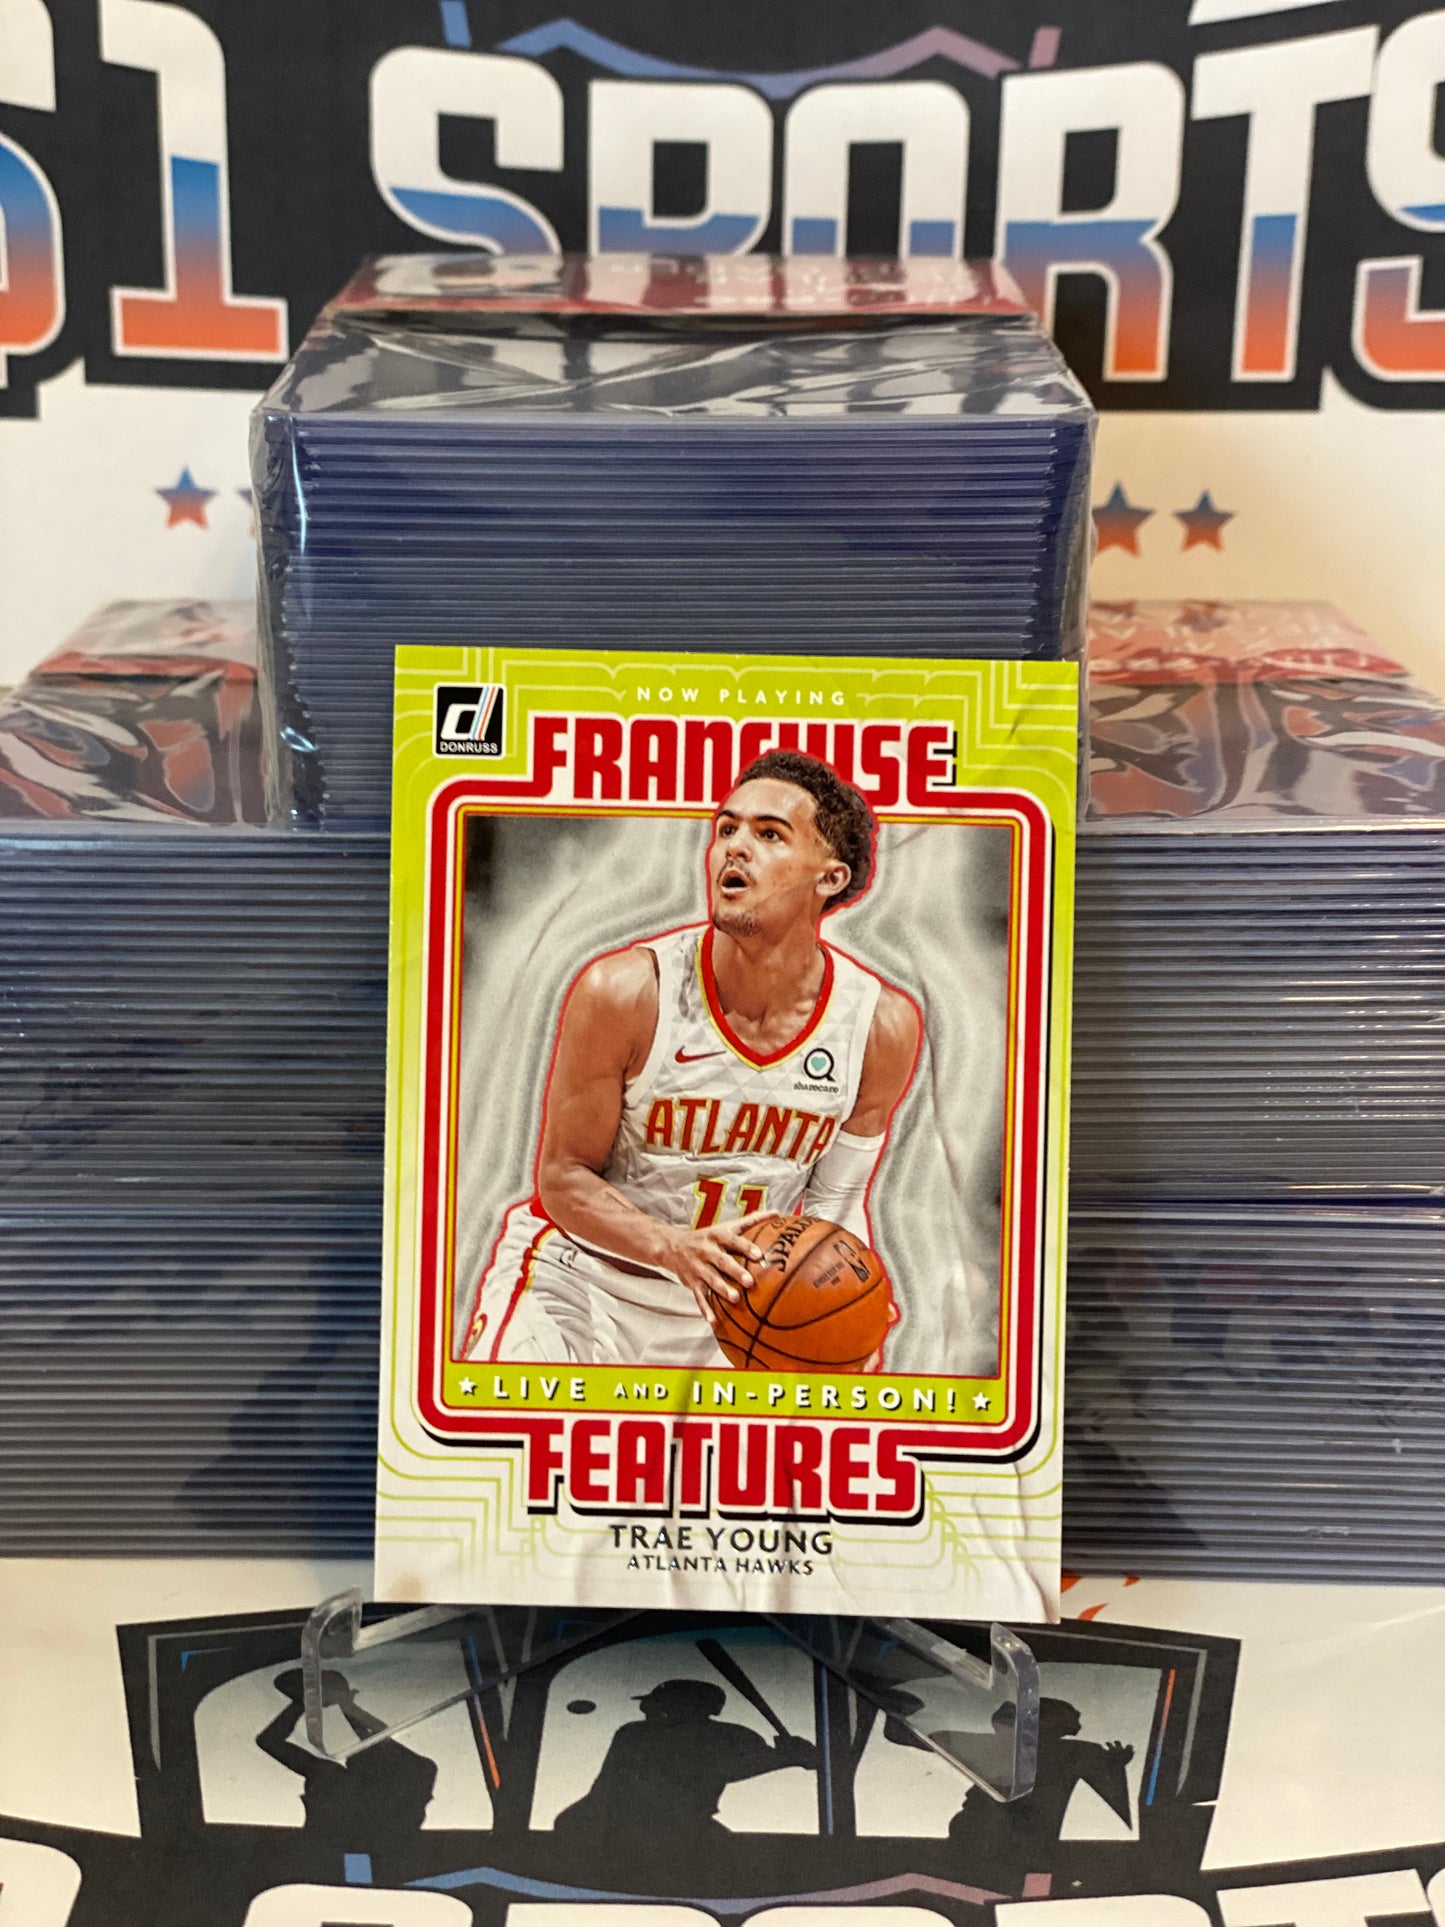 2020 Donruss (Franchise Favorites) Trae Young #1